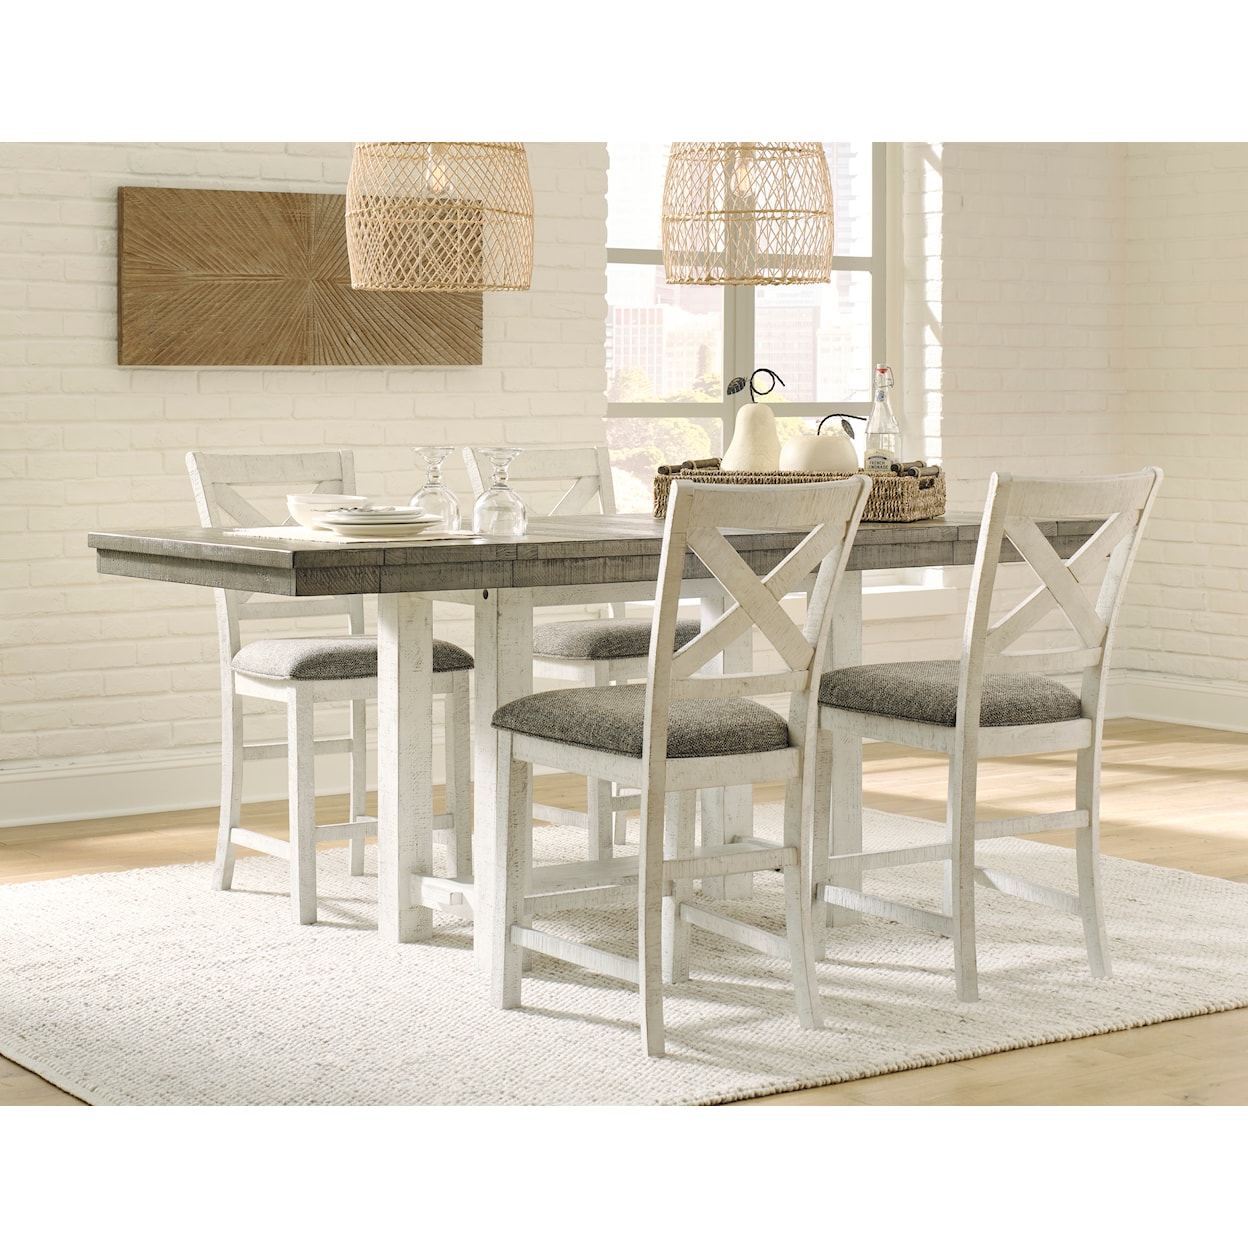 Benchcraft Brewgan Counter Height Dining Table